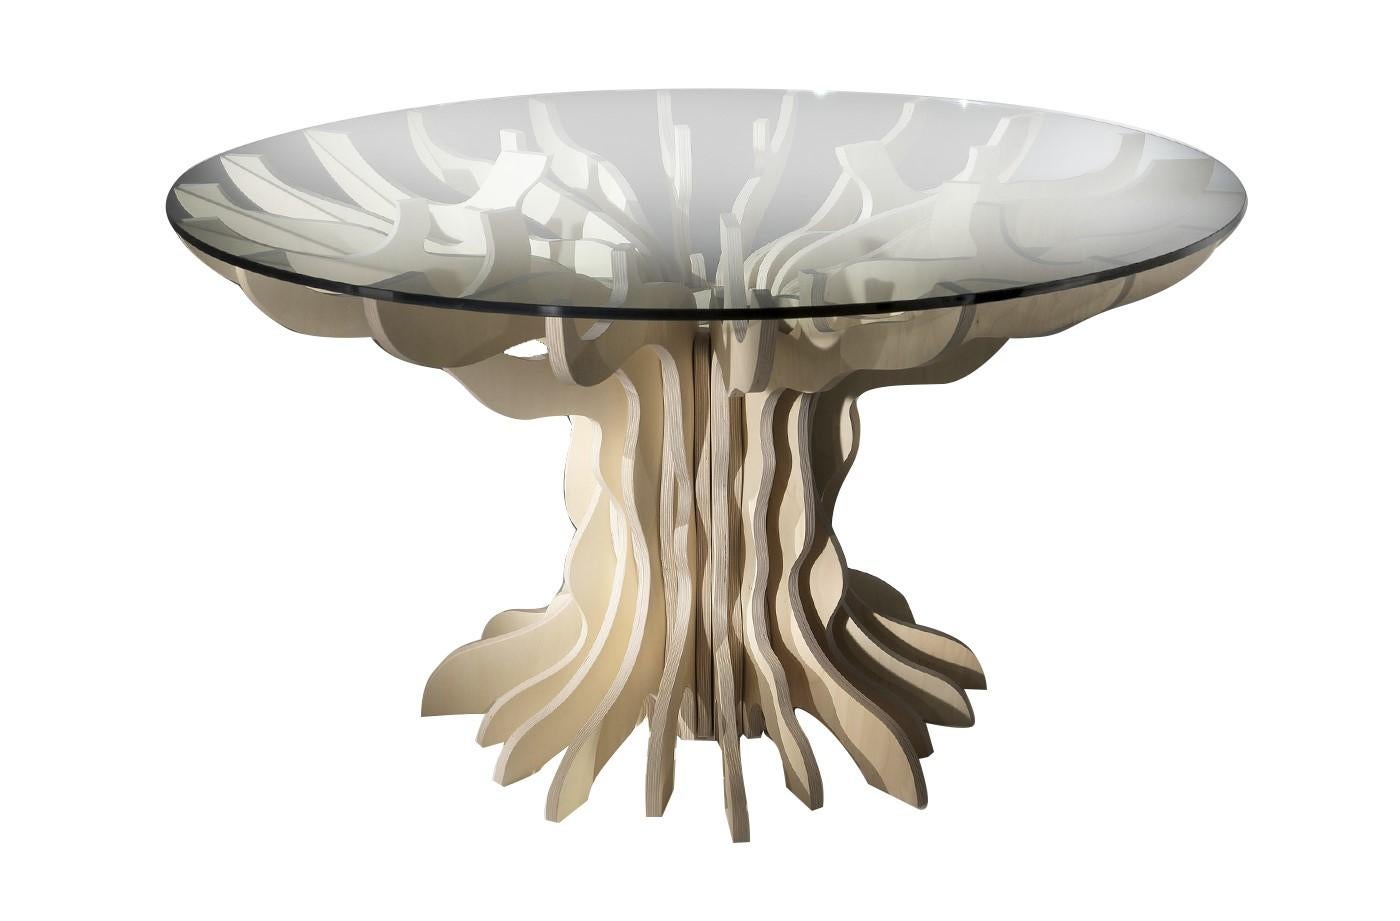 This extraordinary table features a unique design. Its structure is crafted from individual pieces of natural birch wood arranged in a circle forming a tree-like shape. The round top is in tempered glass. The striking contrast between the natural